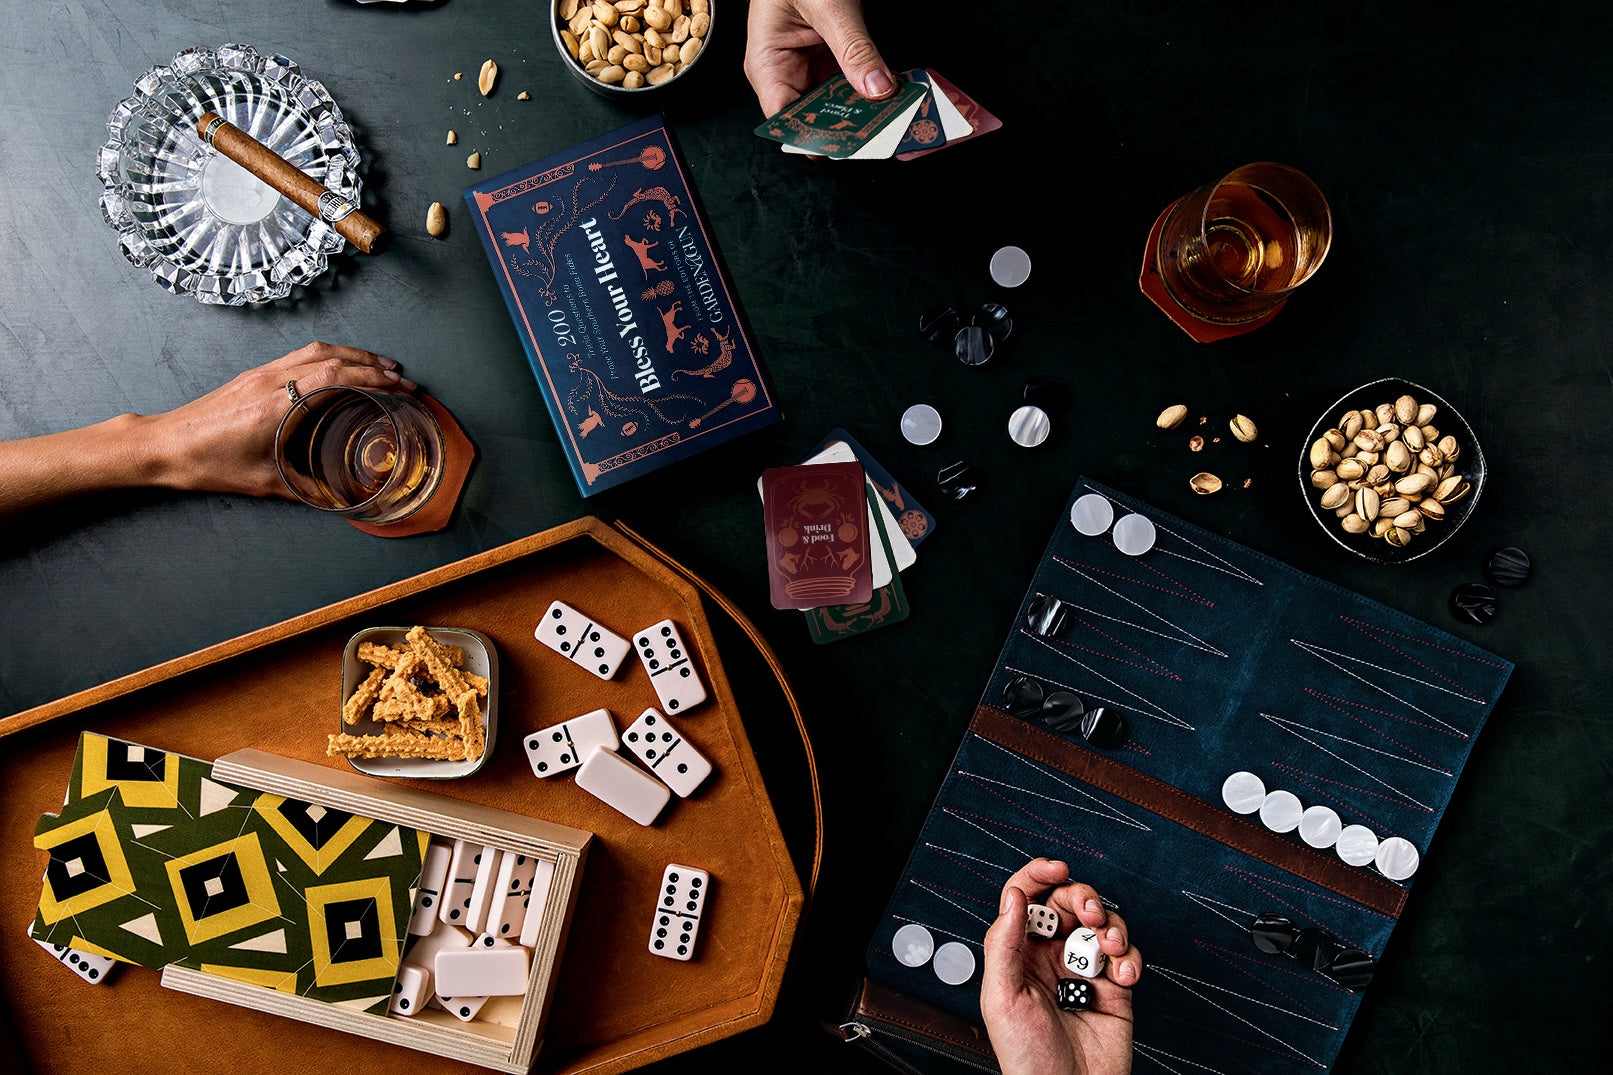 A top-down view of a social gathering with hands playing backgammon, with snacks, drinks, and playing cards on the table.